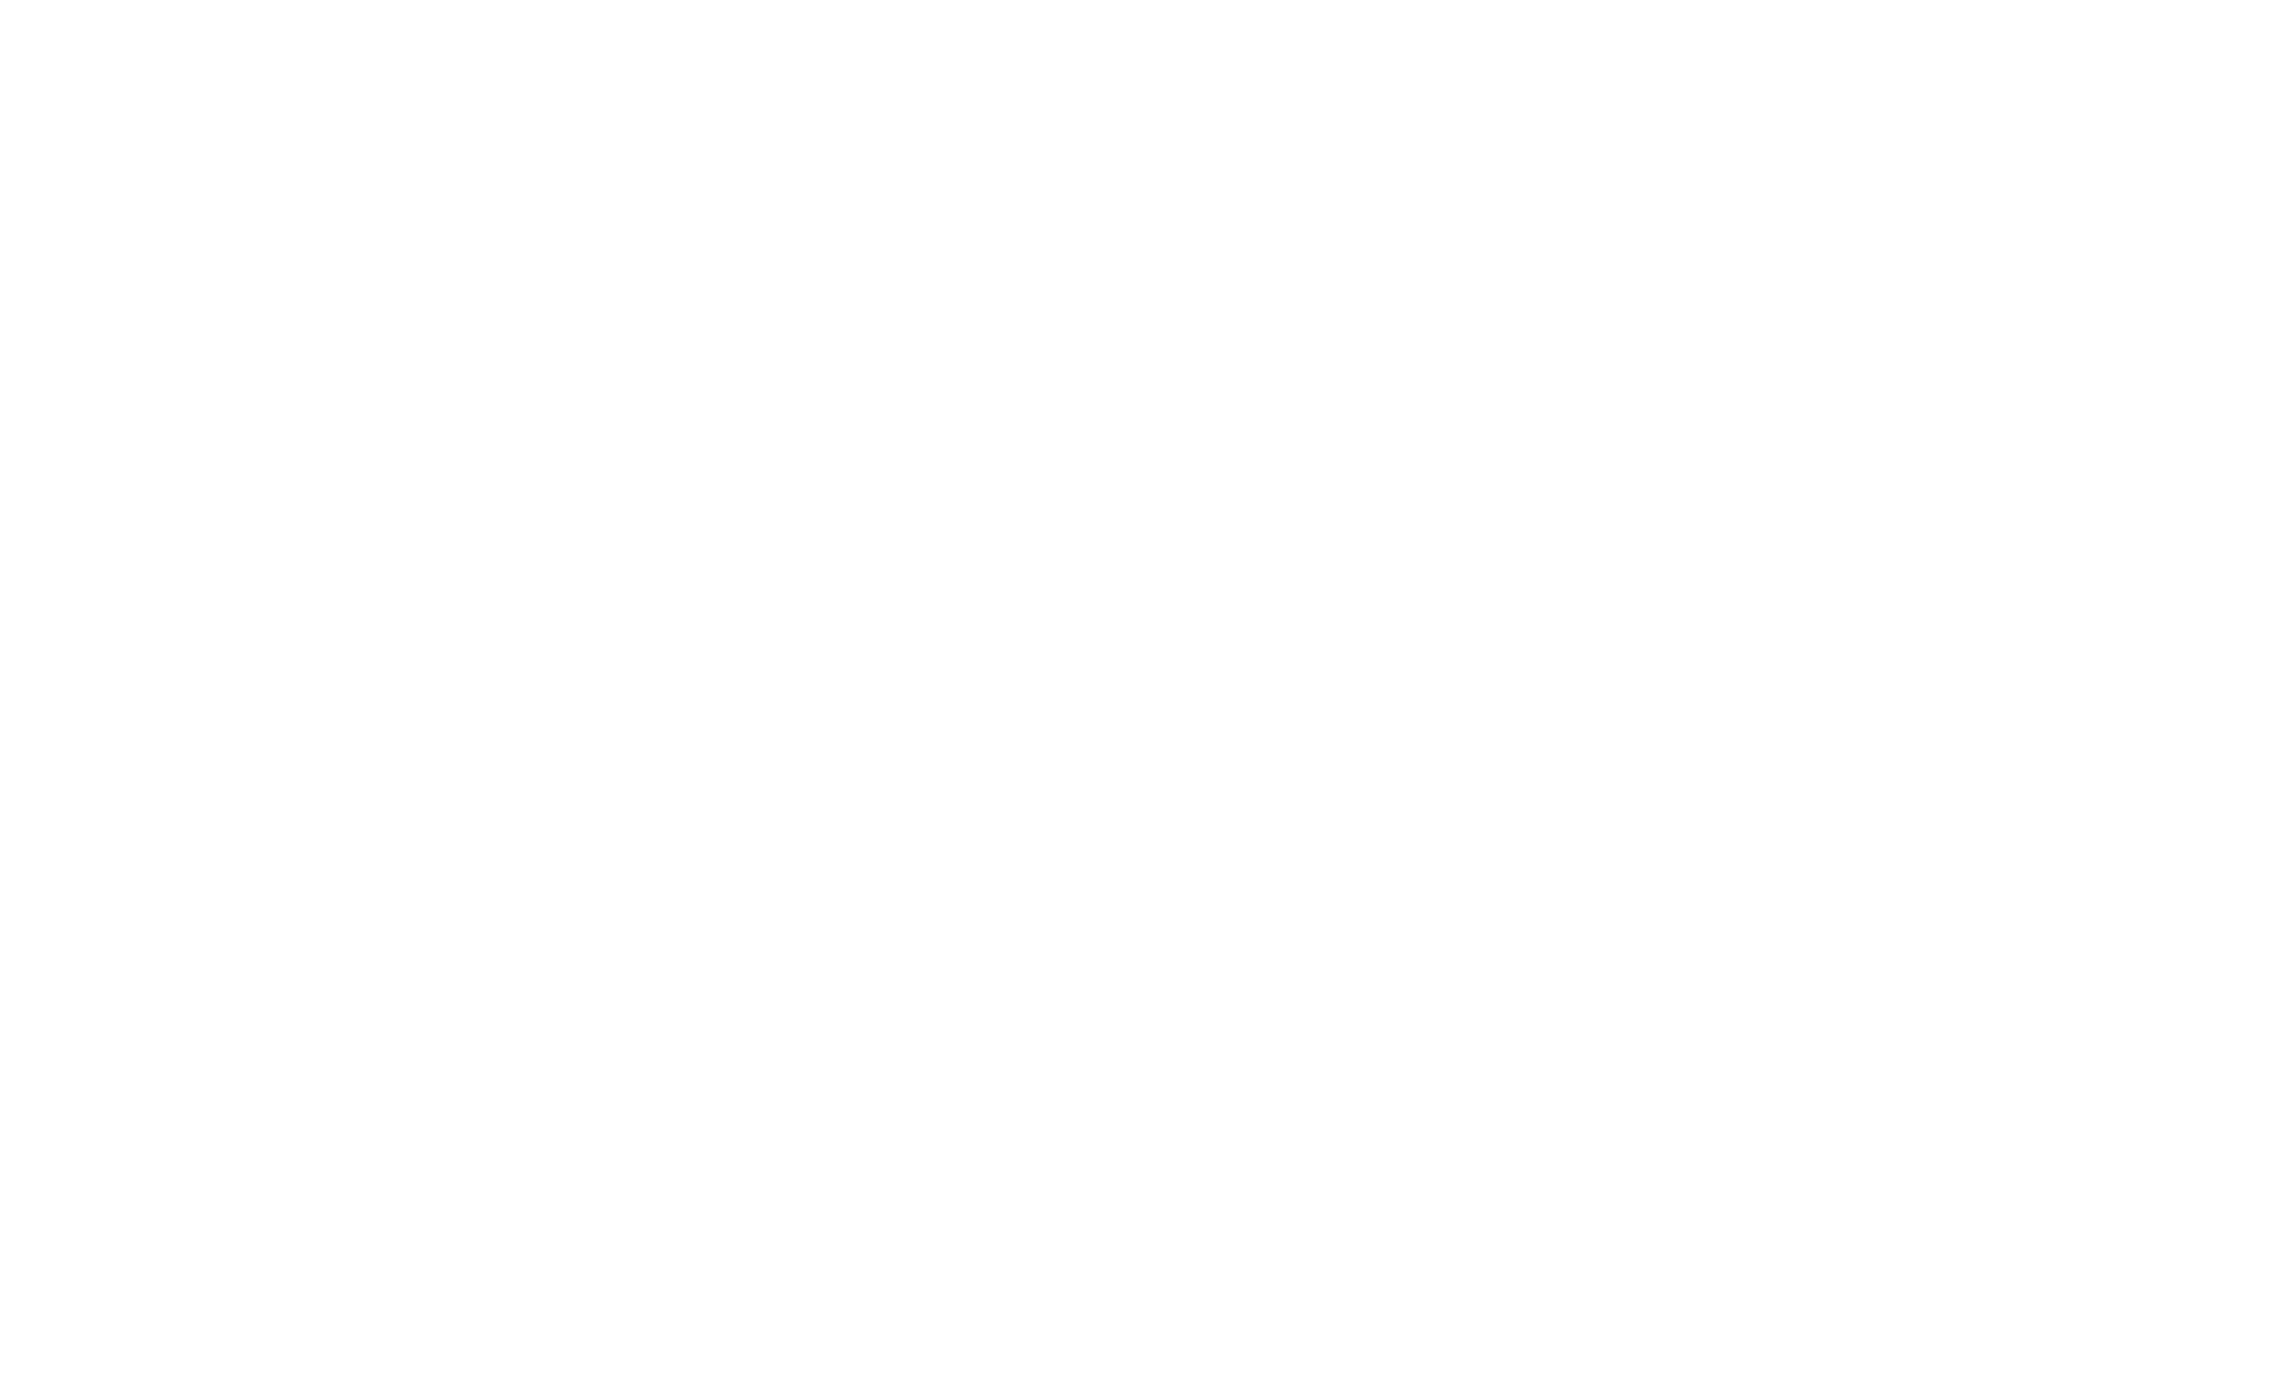 Department for Business and Trade